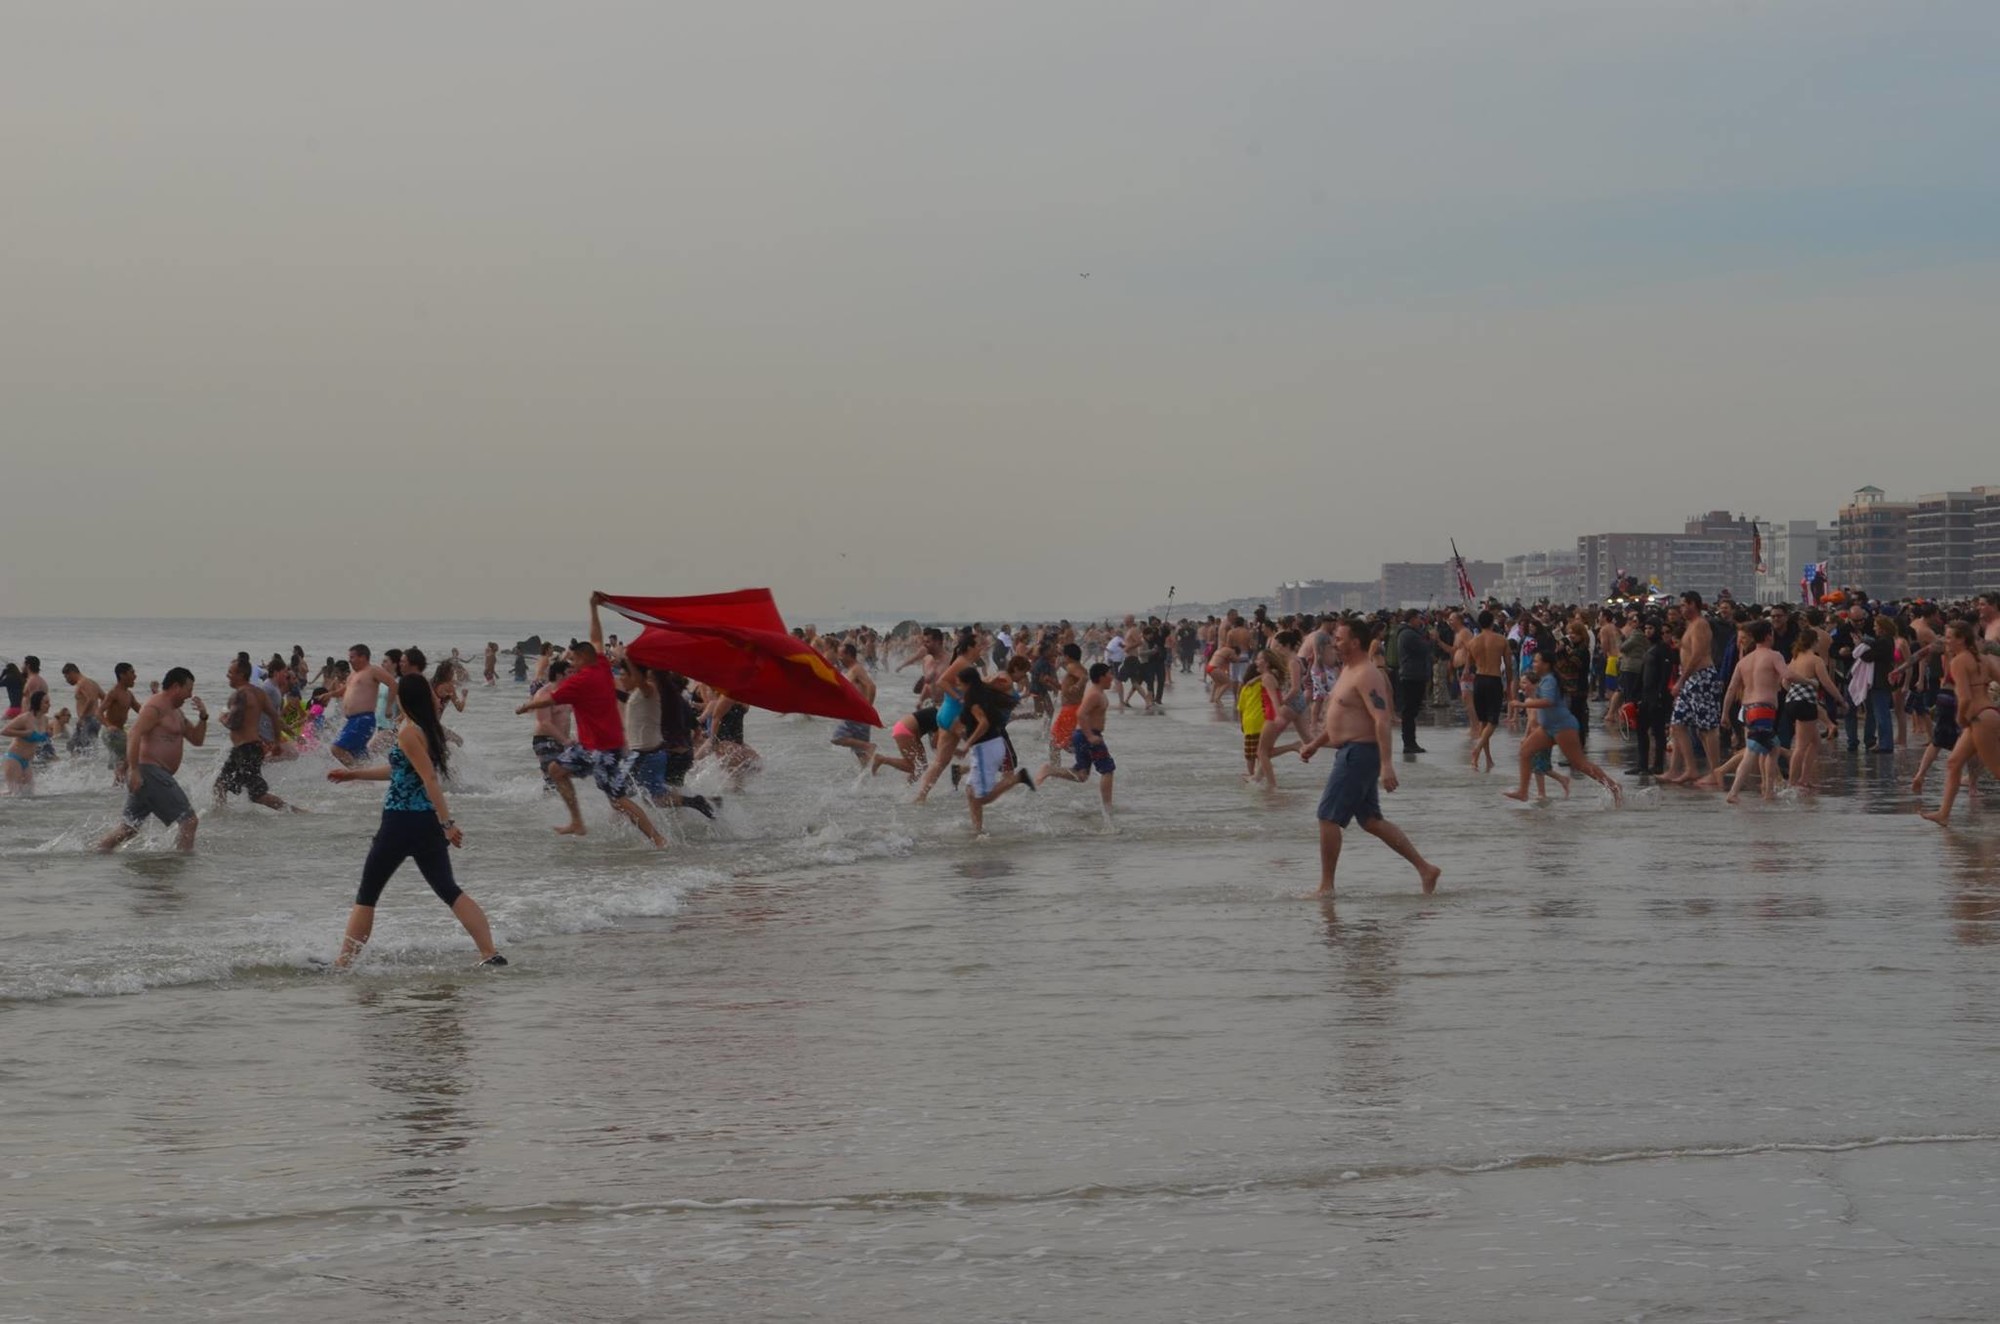 Thousands turned out for the 17th annual Polar Bear splash on Sunday to benefit the Make-A-Wish Foundation.